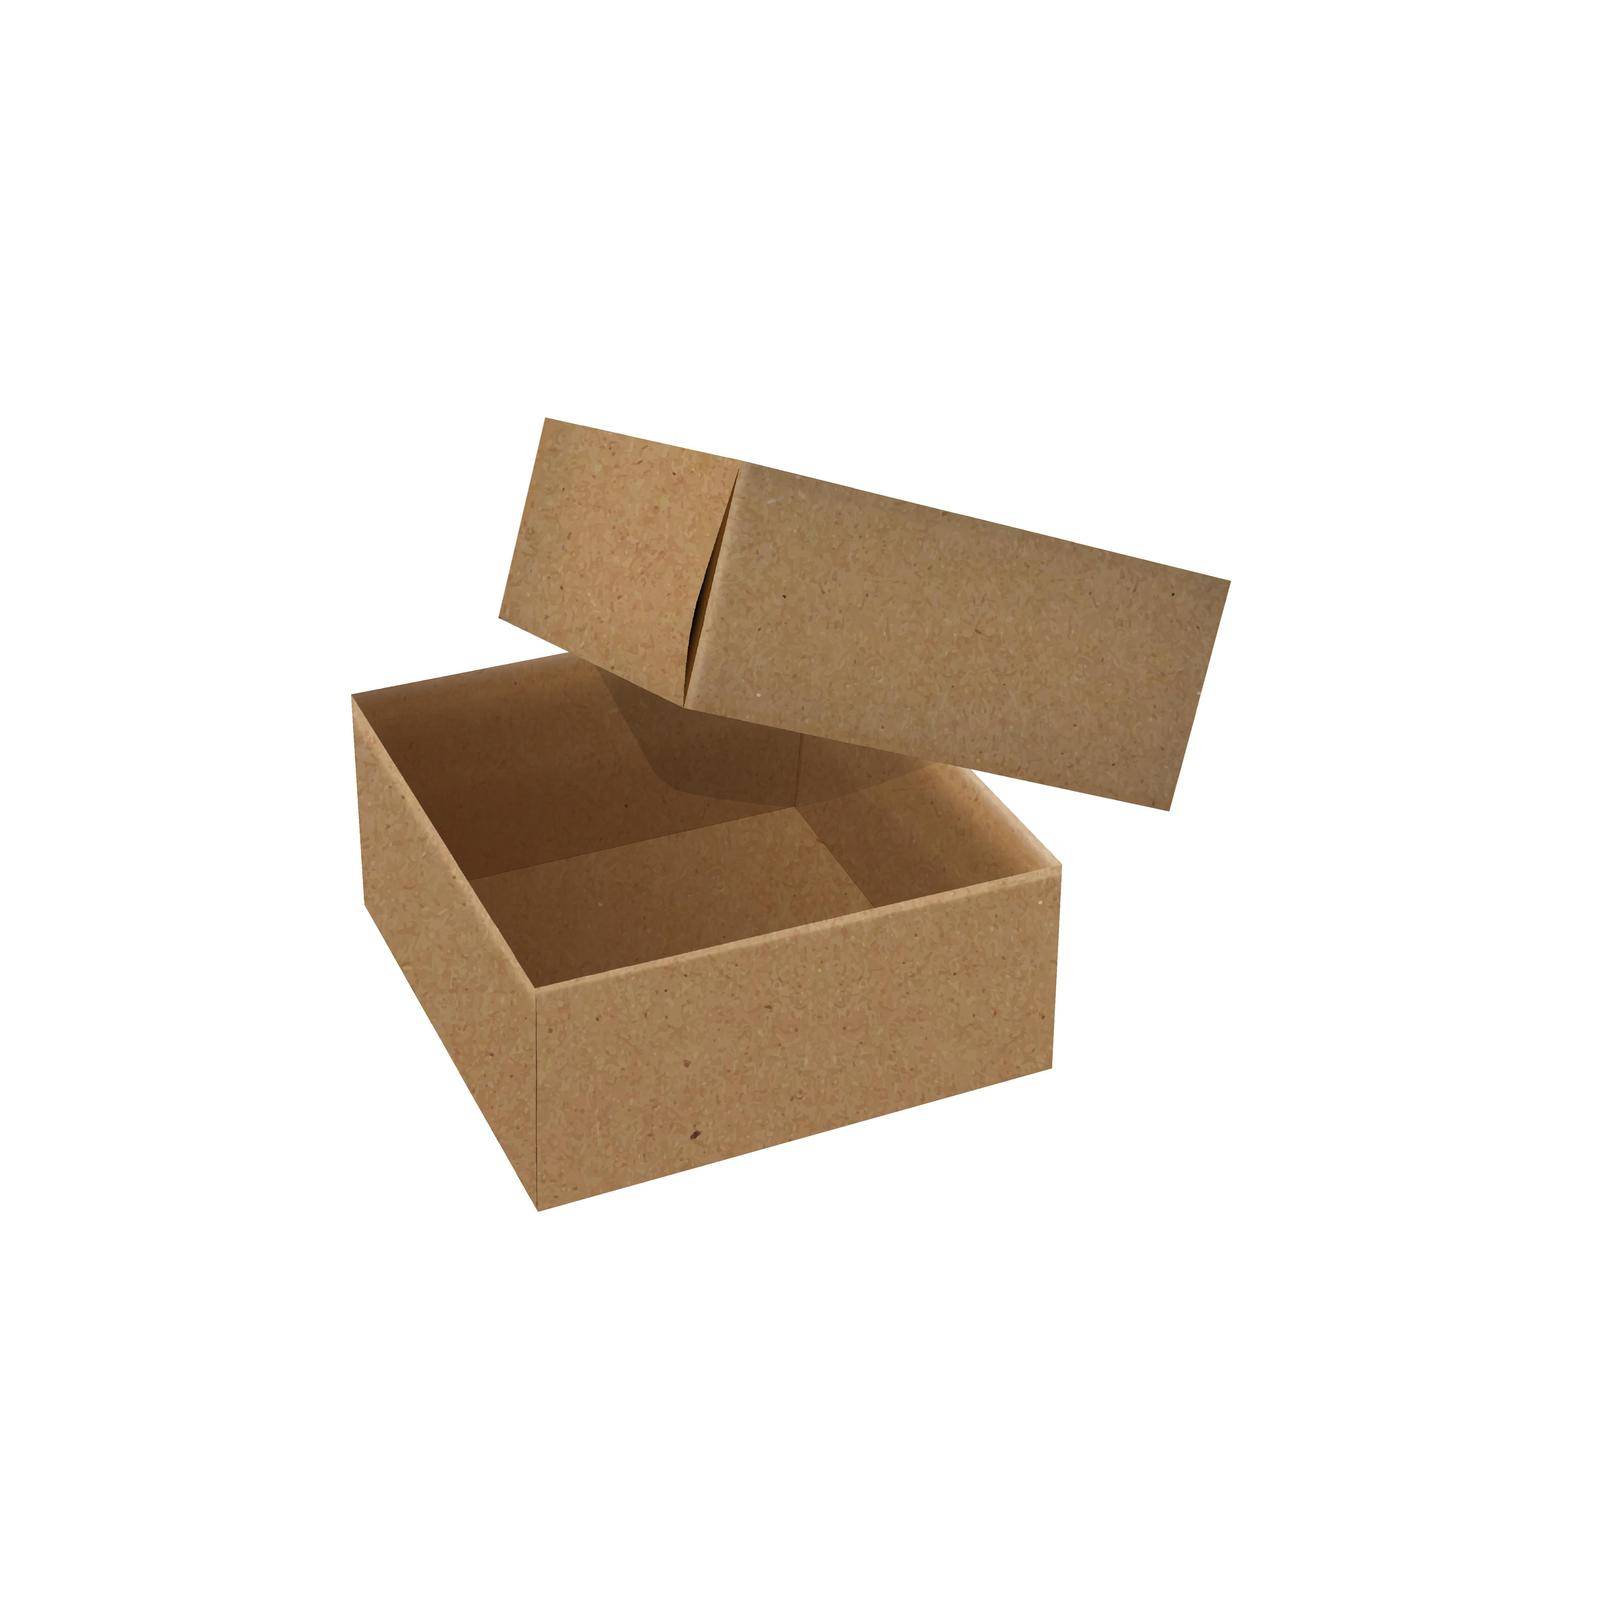 Vector kraft paper opened square box realistic illustration. Isolated 3-d object by pianistka78